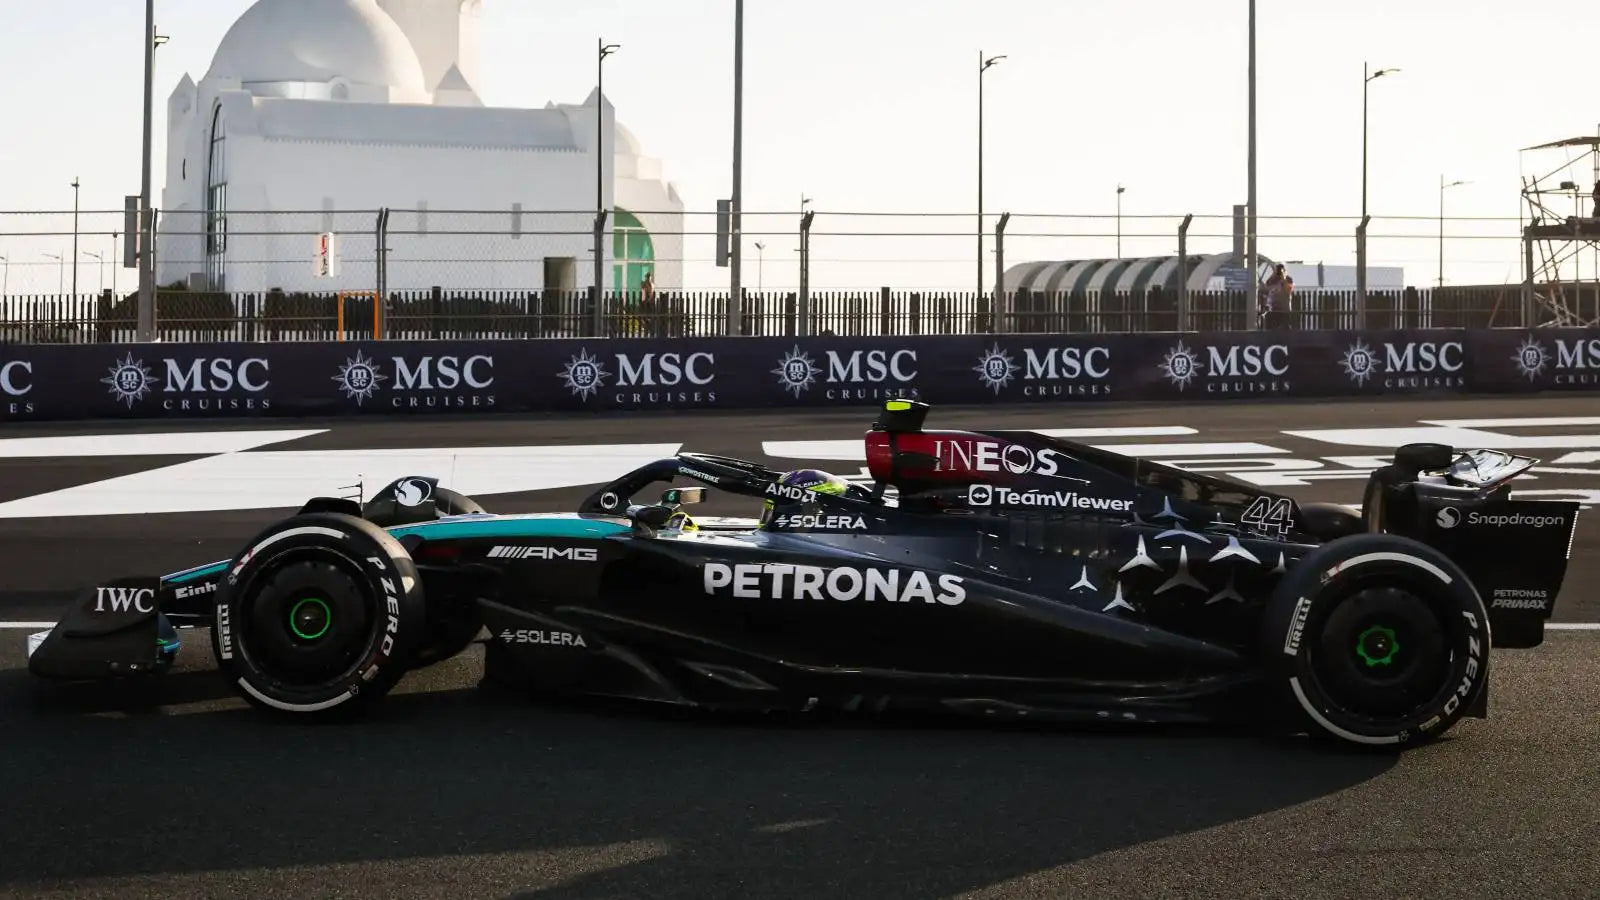 Lewis Hamilton lacking one thing he needs from Mercedes W15 at Saudi Grand Prix